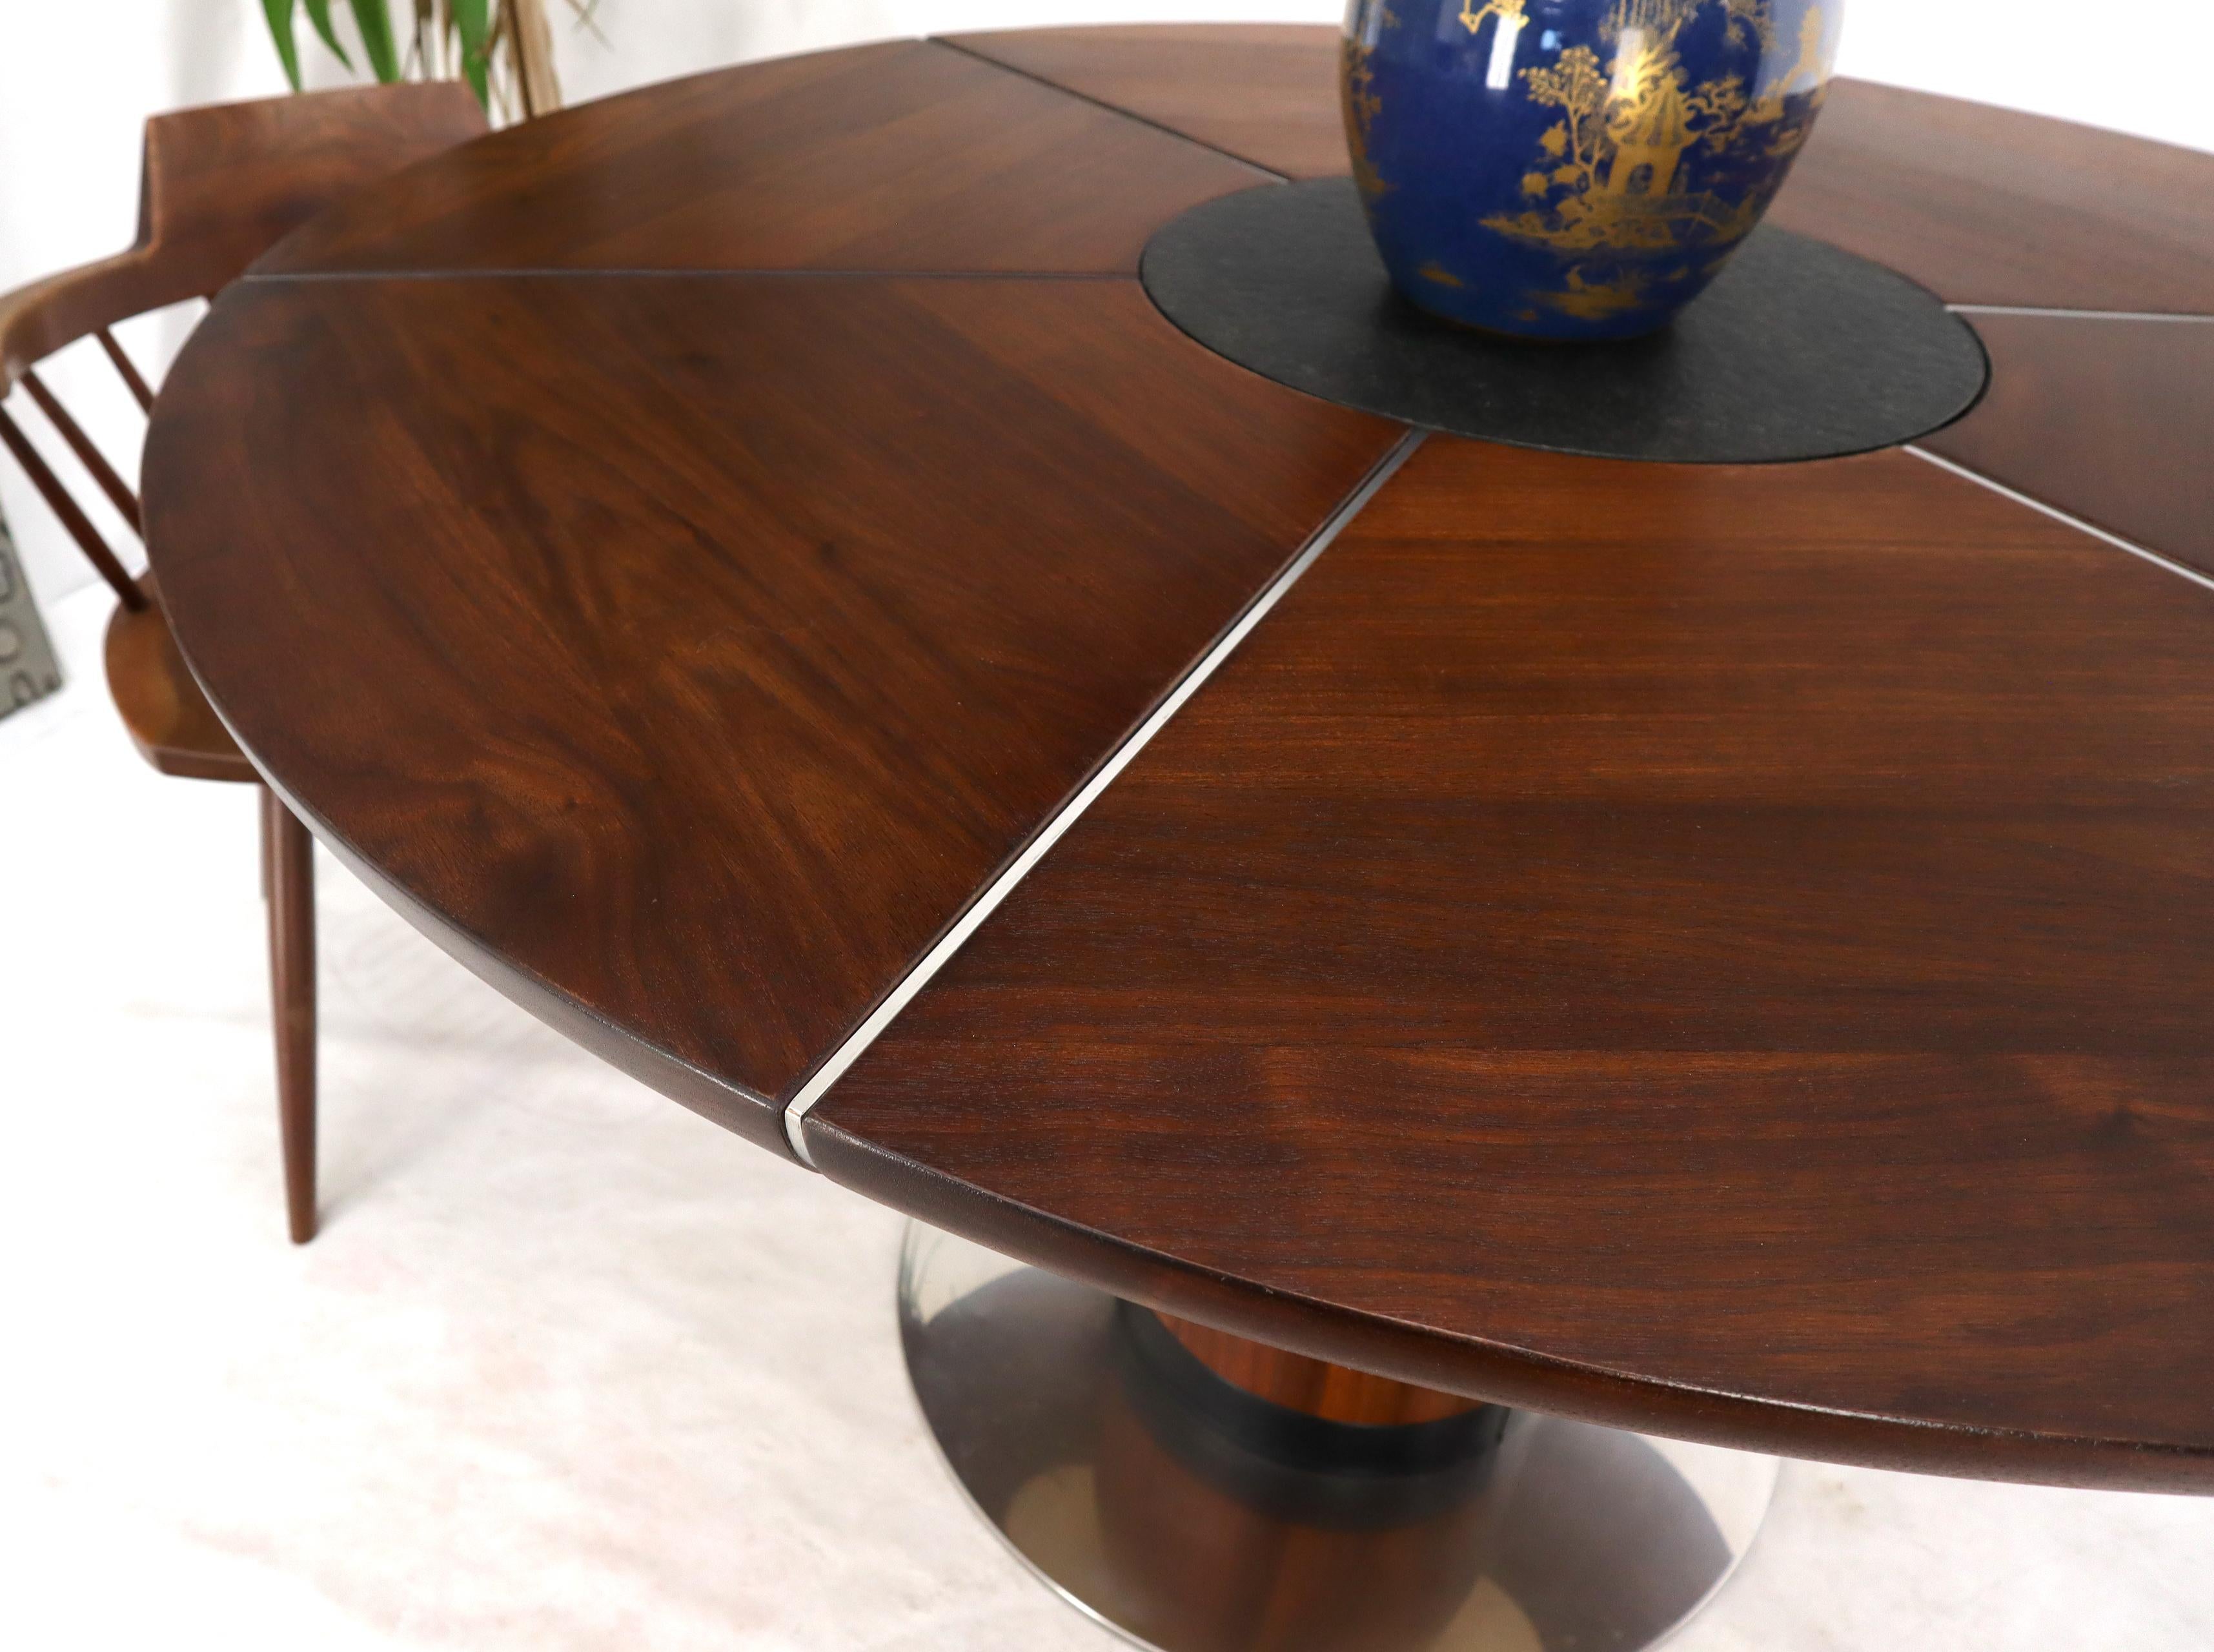 Outstanding quality studio made round pedestal thick walnut top dining dinette table.